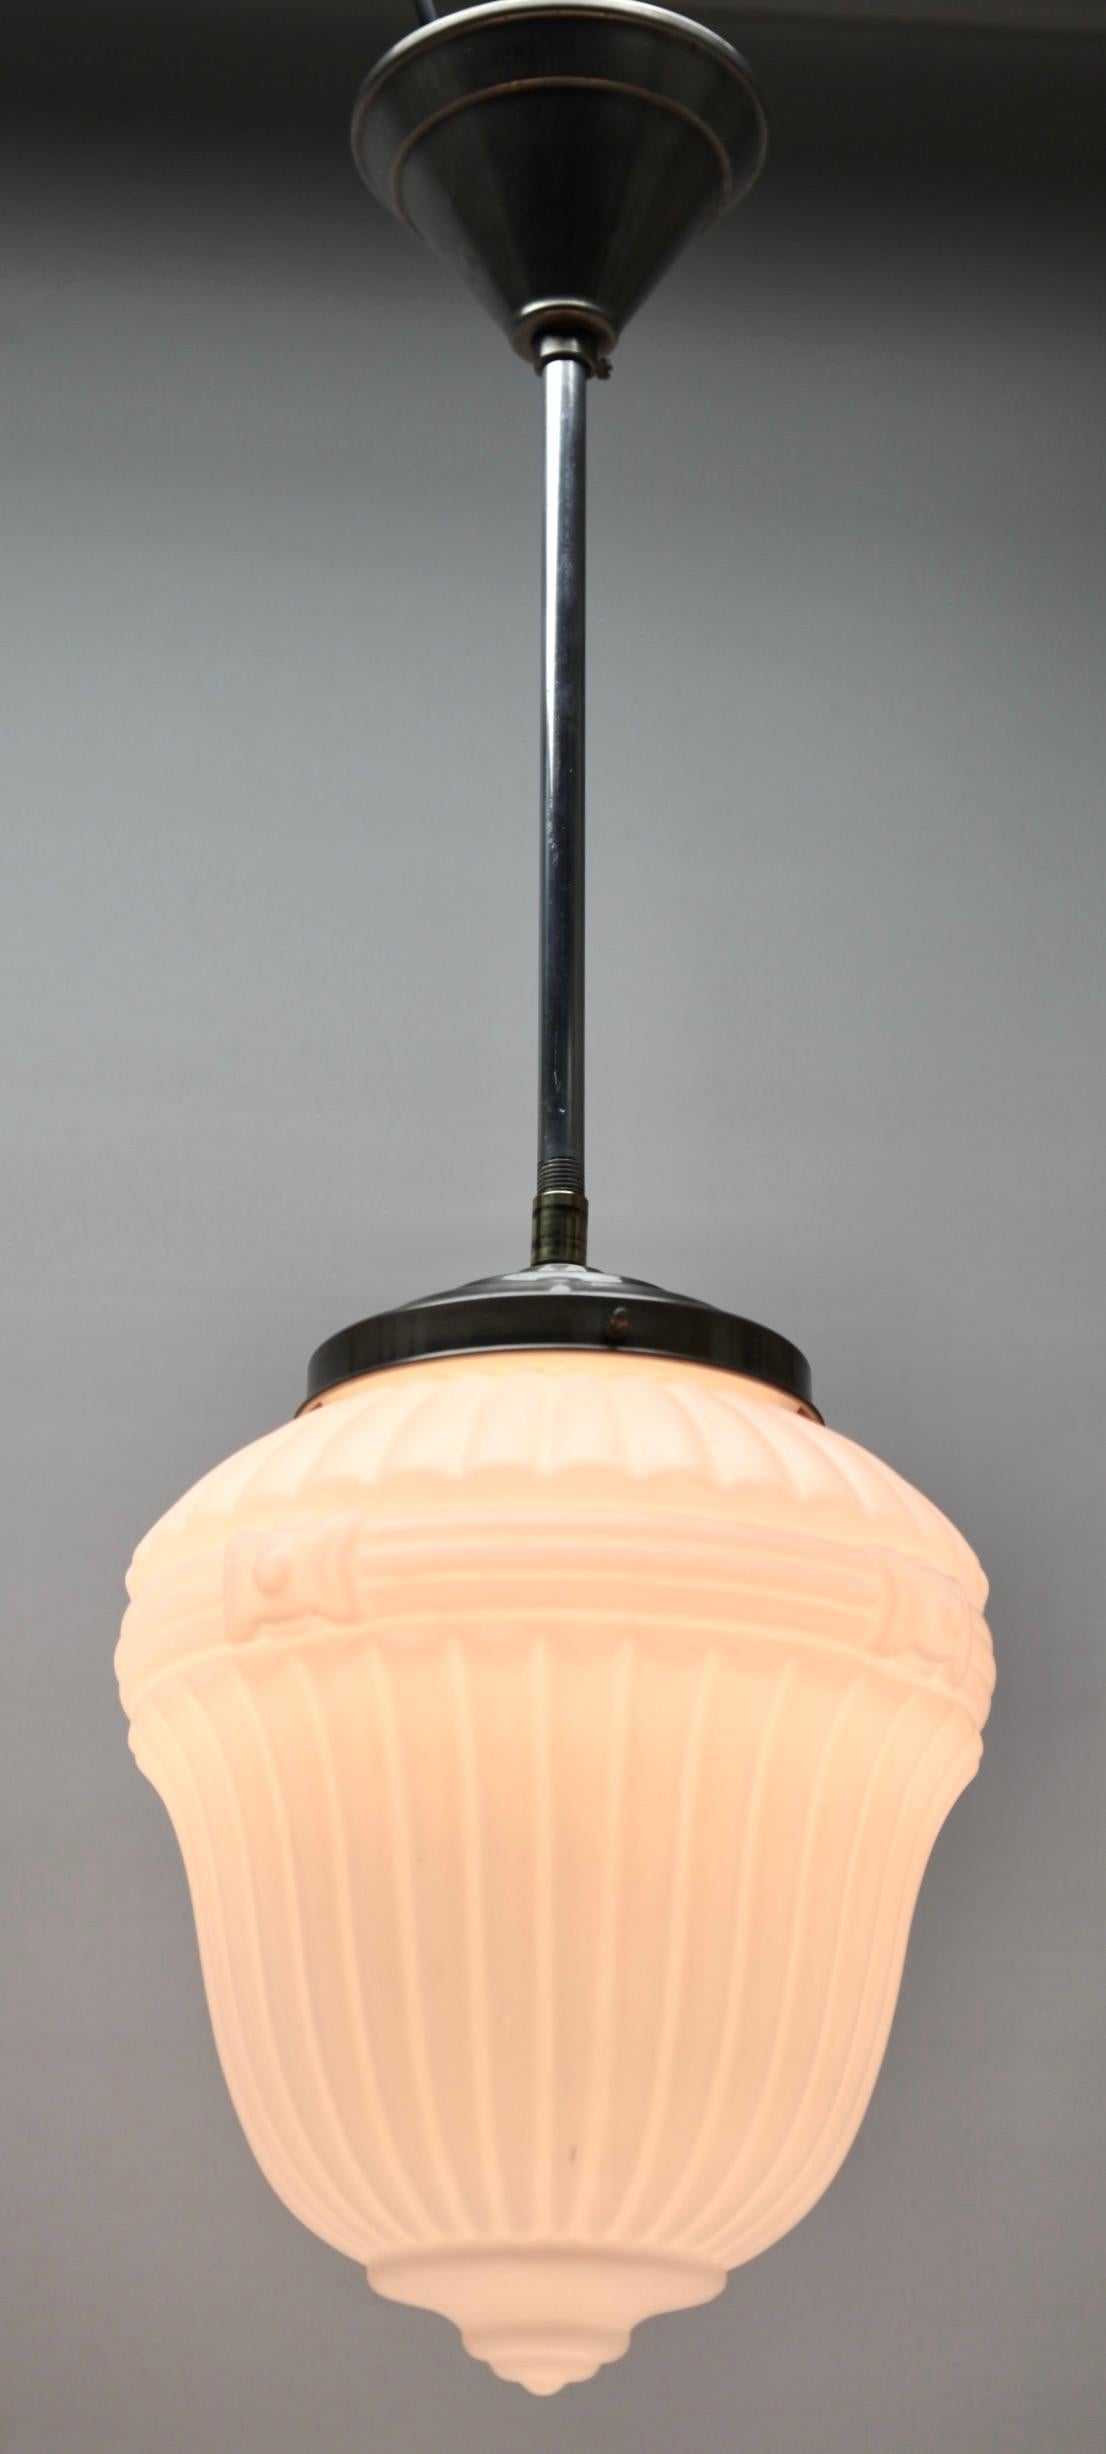 Mid-20th Century Scailmont Pendant Lamp with a Opaline Shade and Chrome Fittings, 1930s, Belgium For Sale